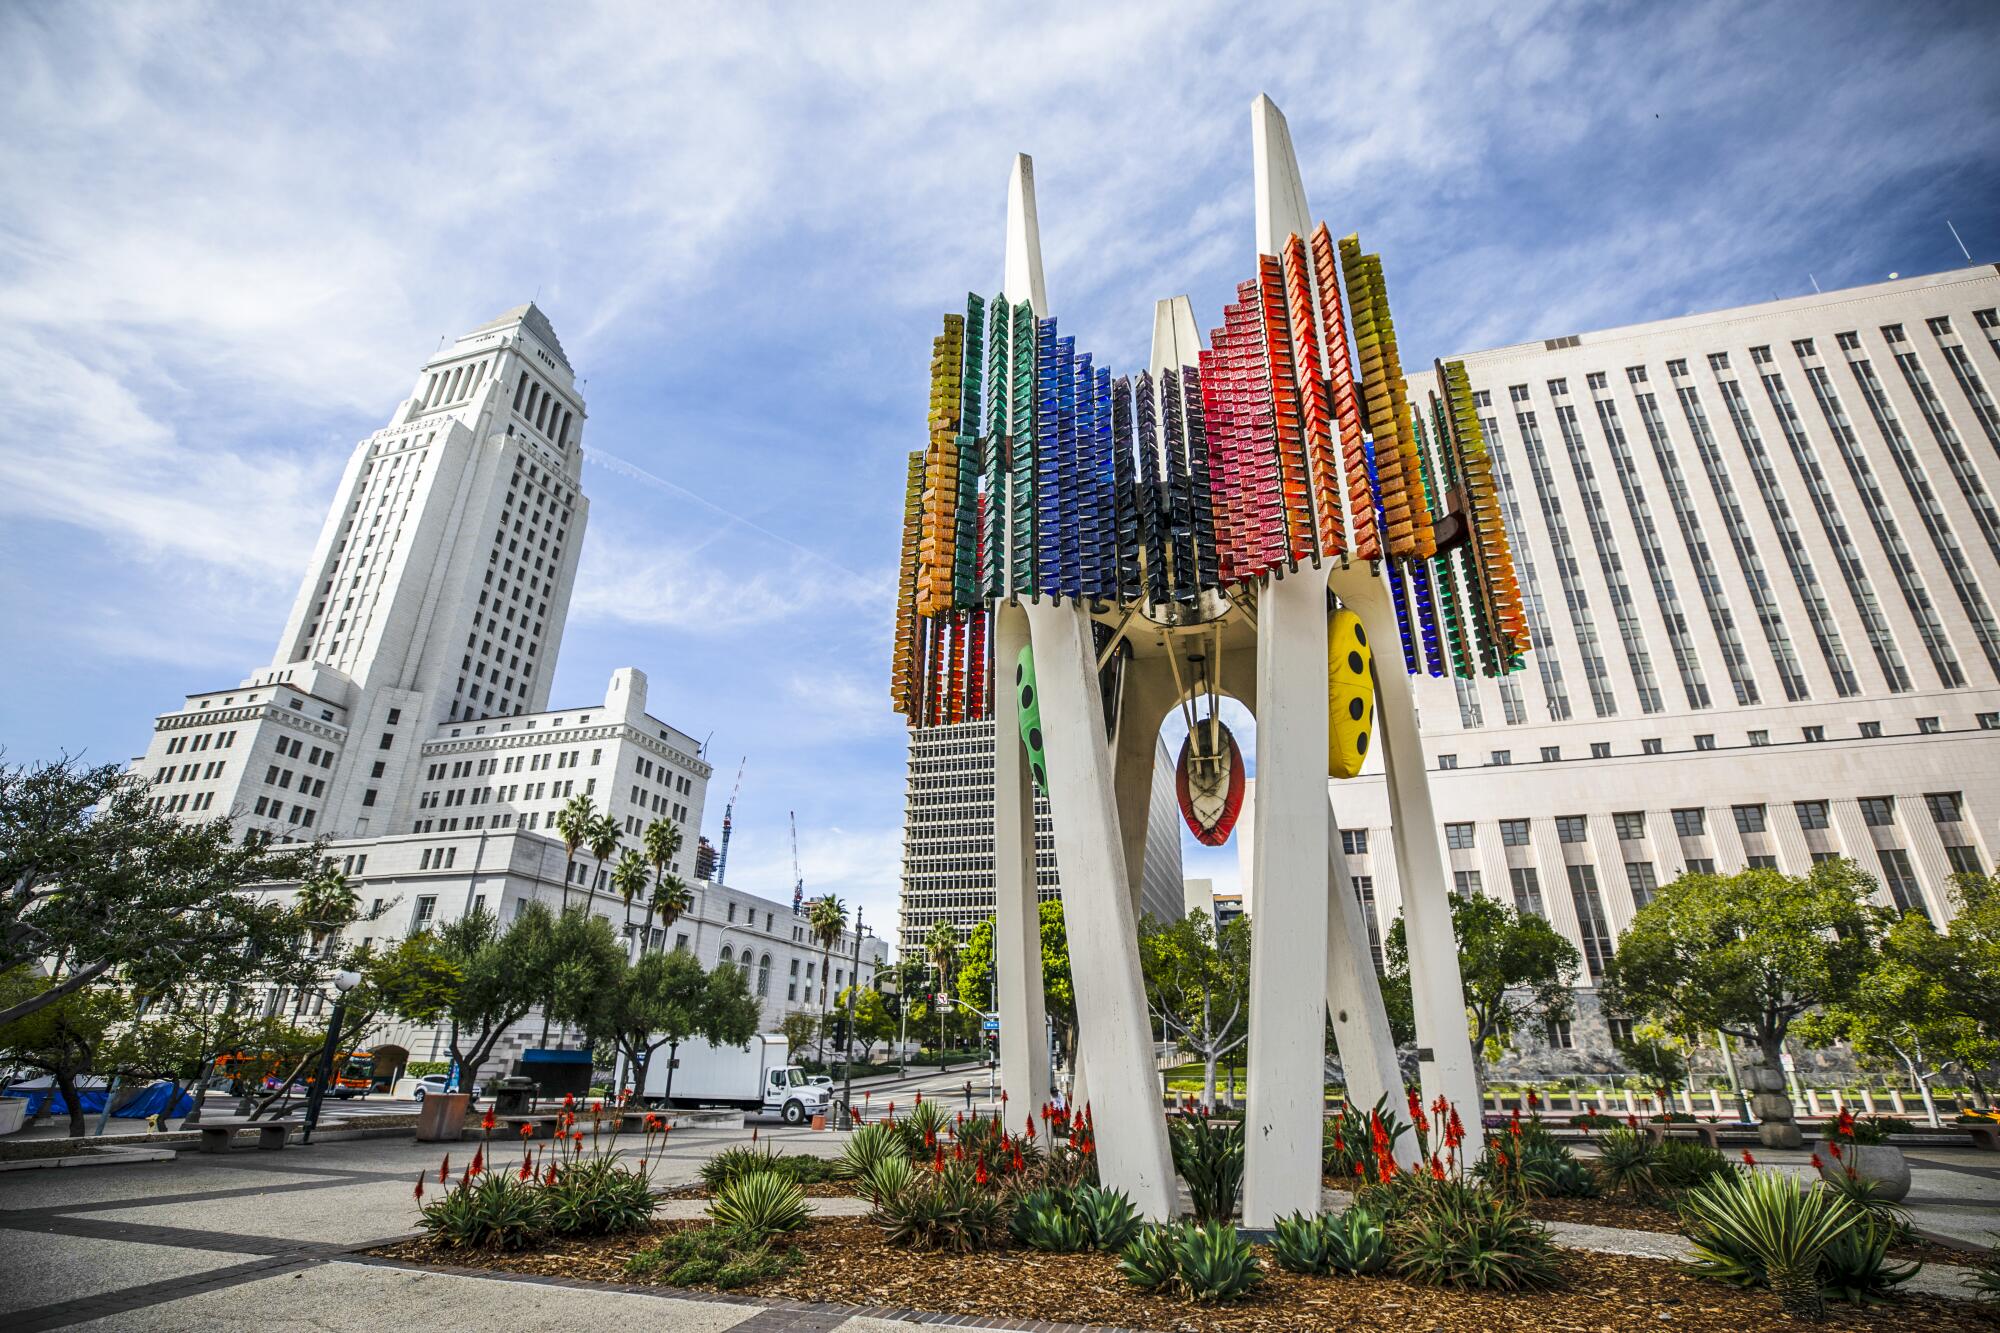 The Triforium sculpture features nearly 1,500 multicolored Venetian glass prisms and a 79-note electronic carillon.